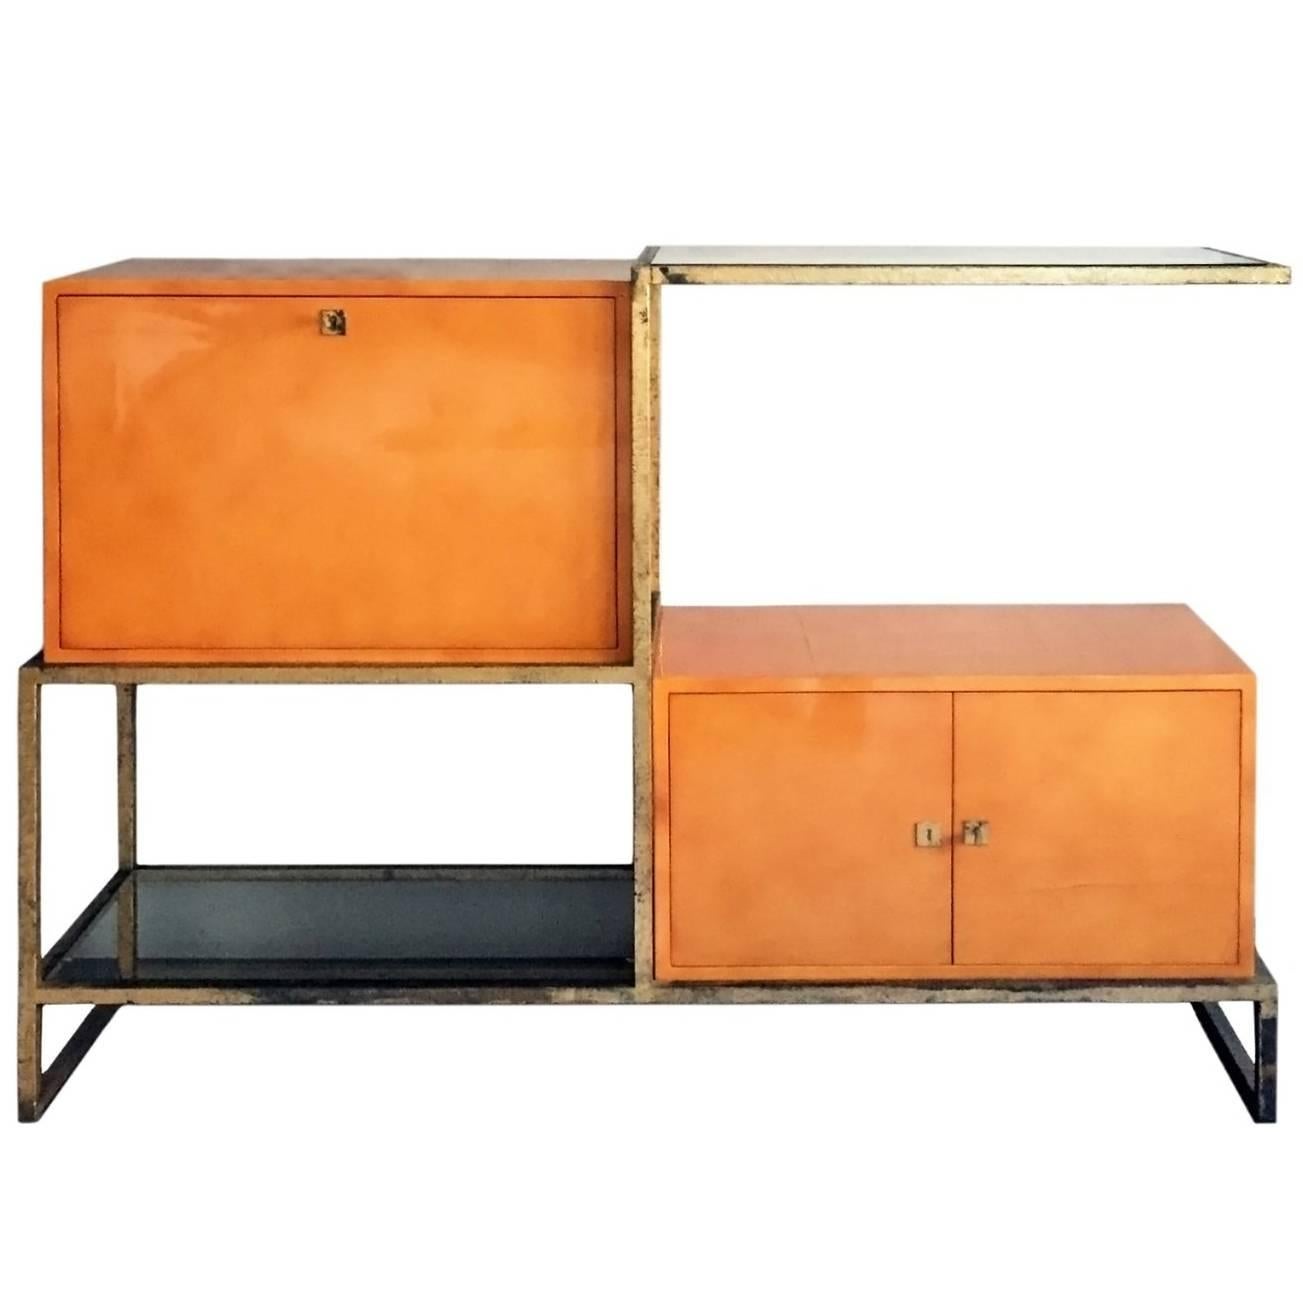 Exceptional Lacquer and Gilt Iron Secretary Cabinet by Roger and Robert Thibier For Sale